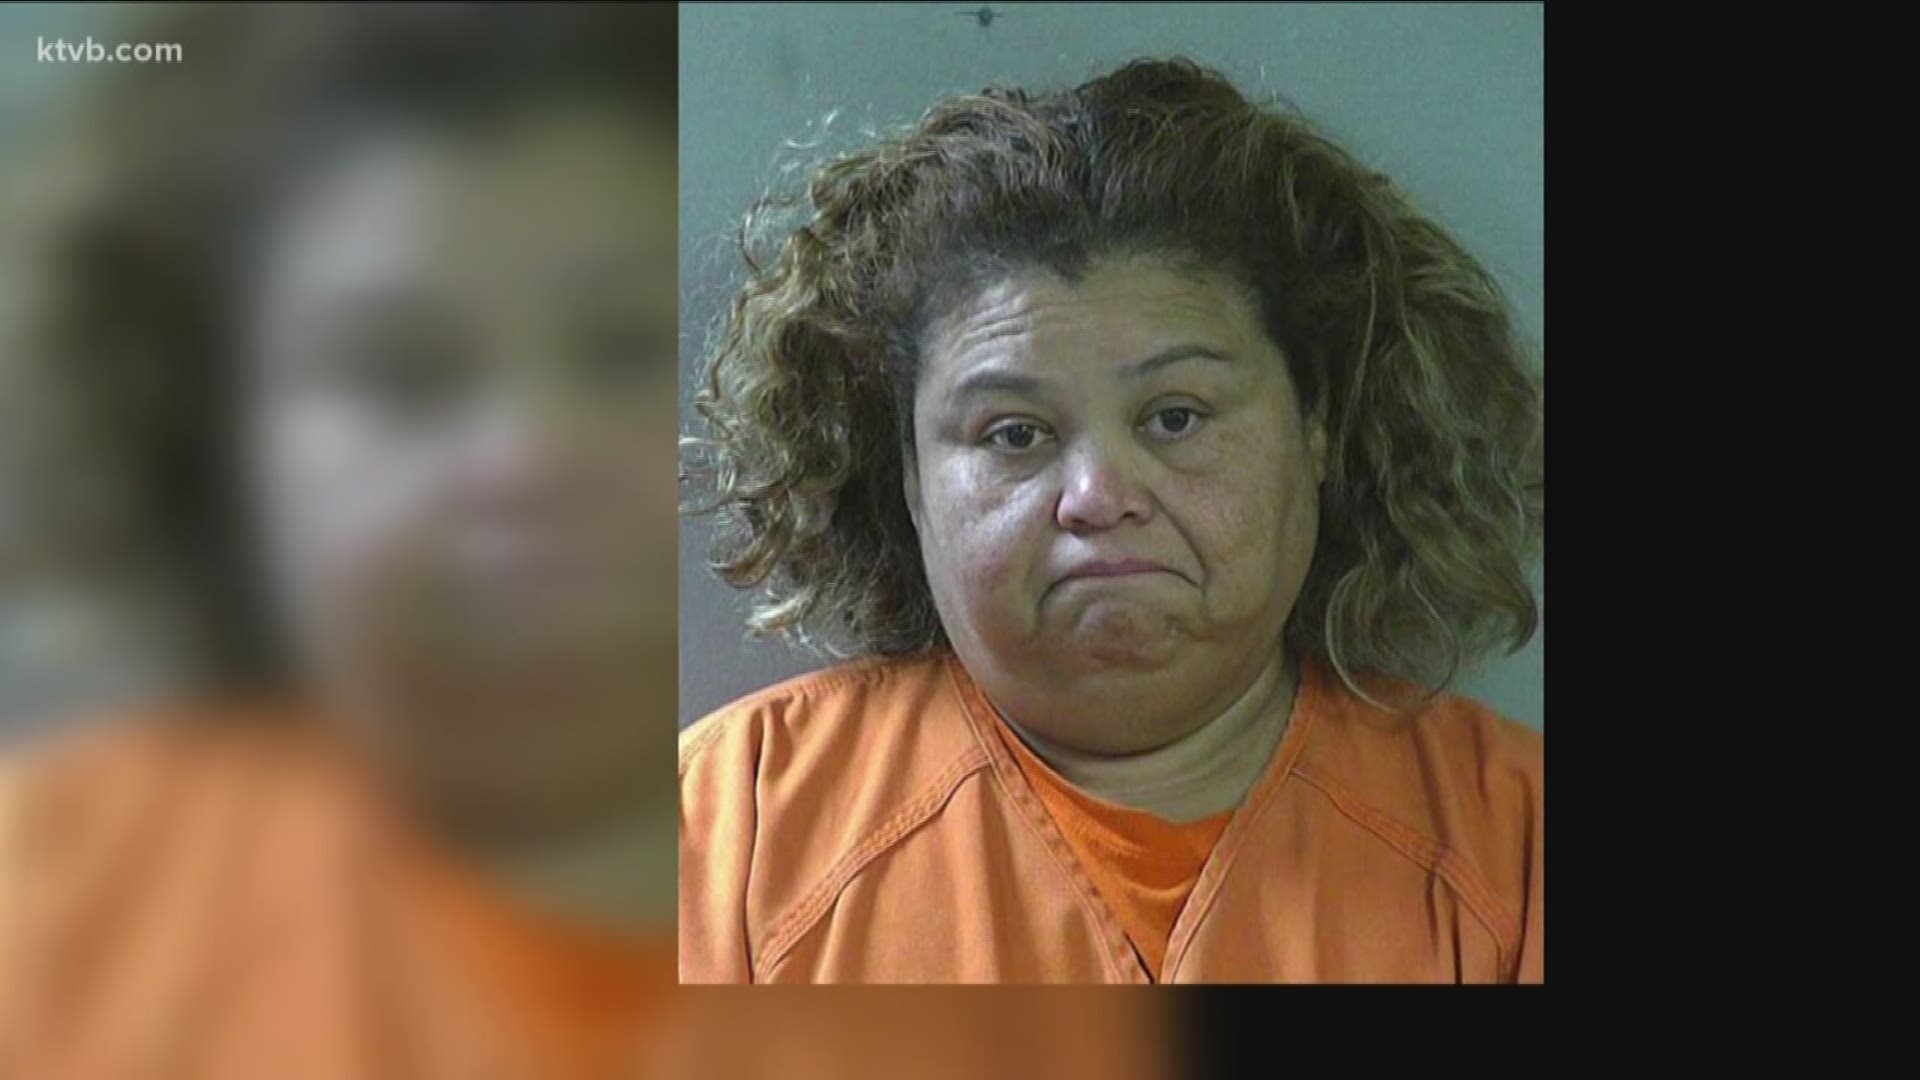 Police say Edith Linares told them she was upset her boyfriend was speaking to another woman.